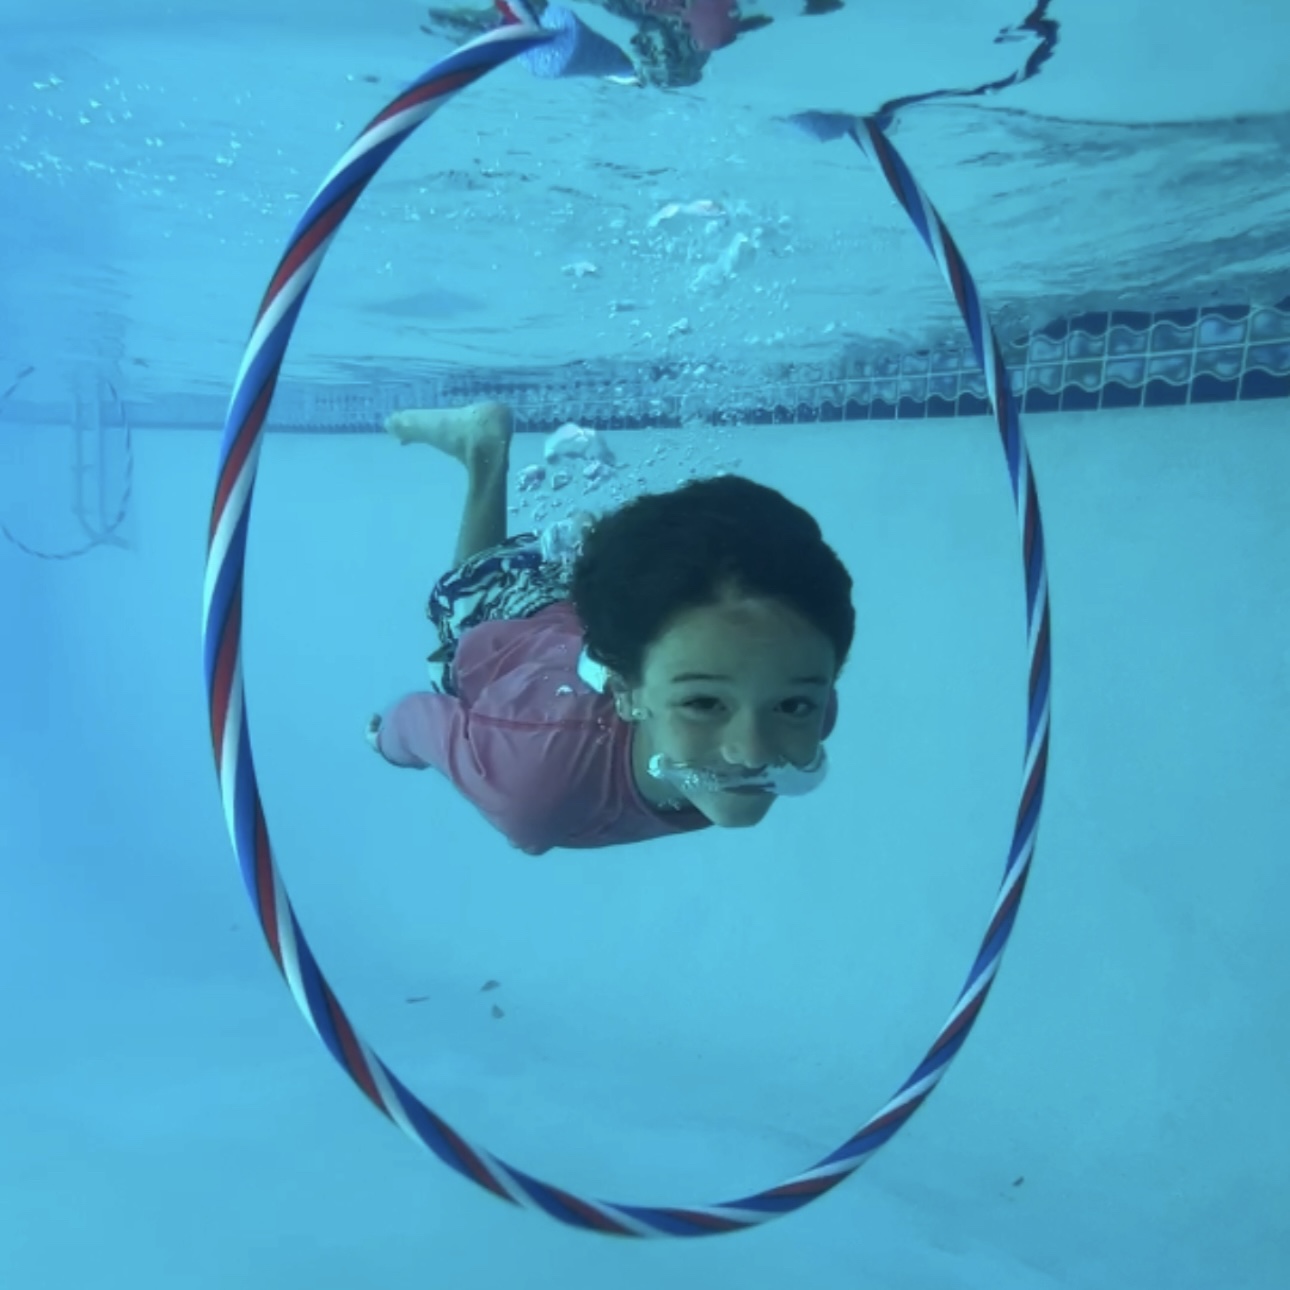 swim through rings. how to make them for underwater fun, games, obstacle courses DIY